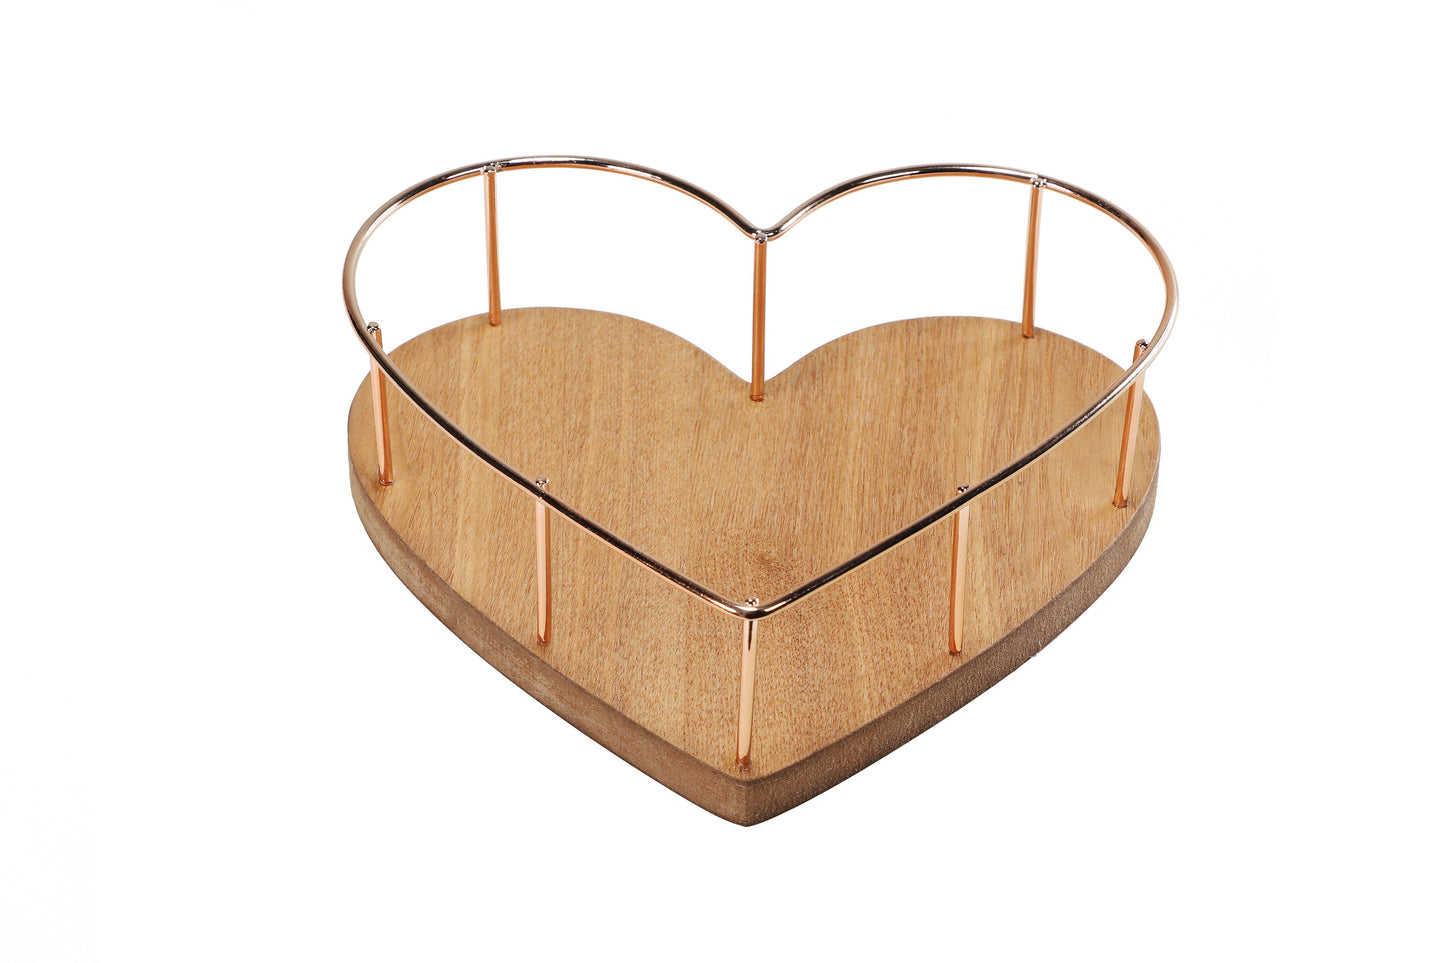 2.75" Heart Shaped Tray with Wooded Base